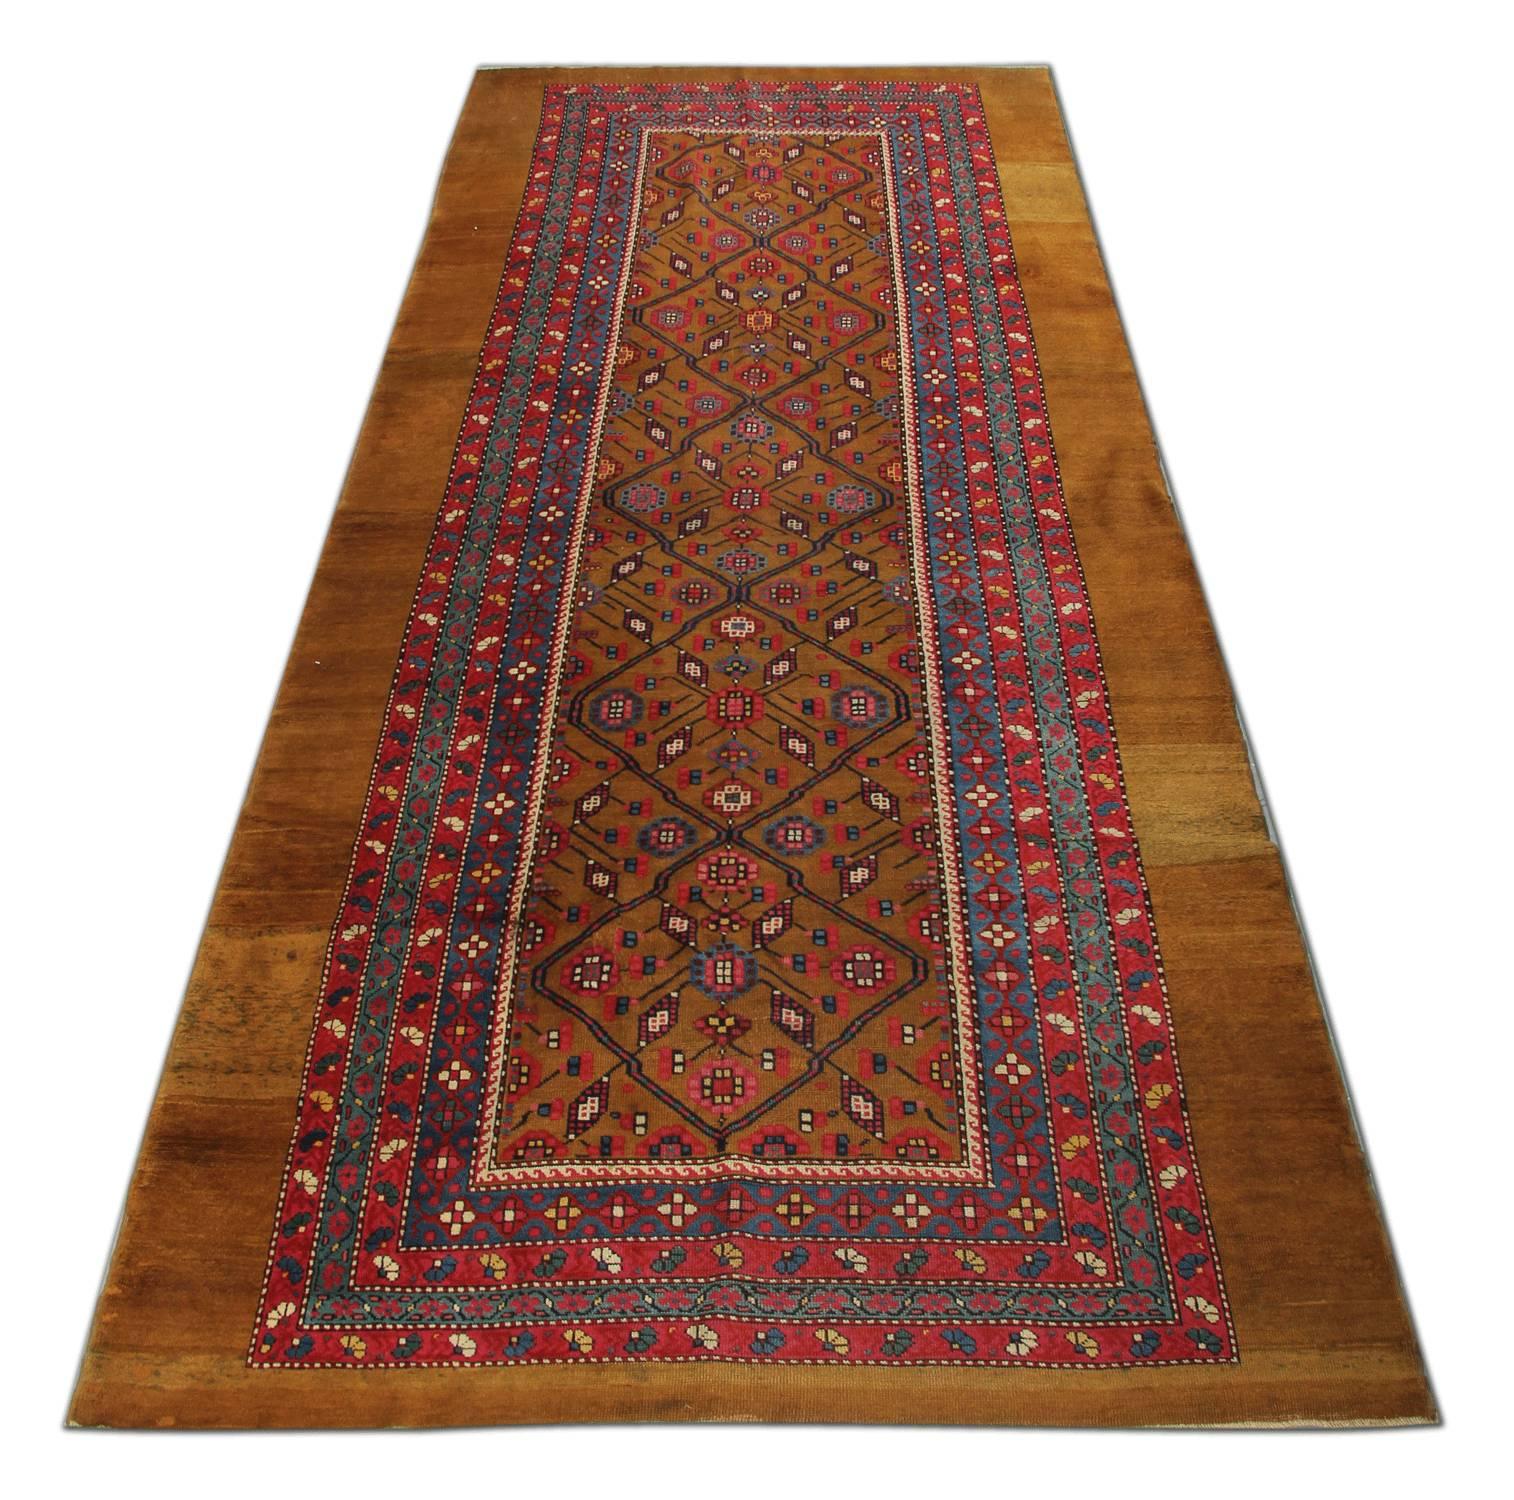 These handmade carpet runner oriental rugs are a rare find because of their colour combination. This is a beautiful old camel ground woven rug in near-mint condition. Antique rugs are made with a full pile everywhere, finely woven and full of charm.